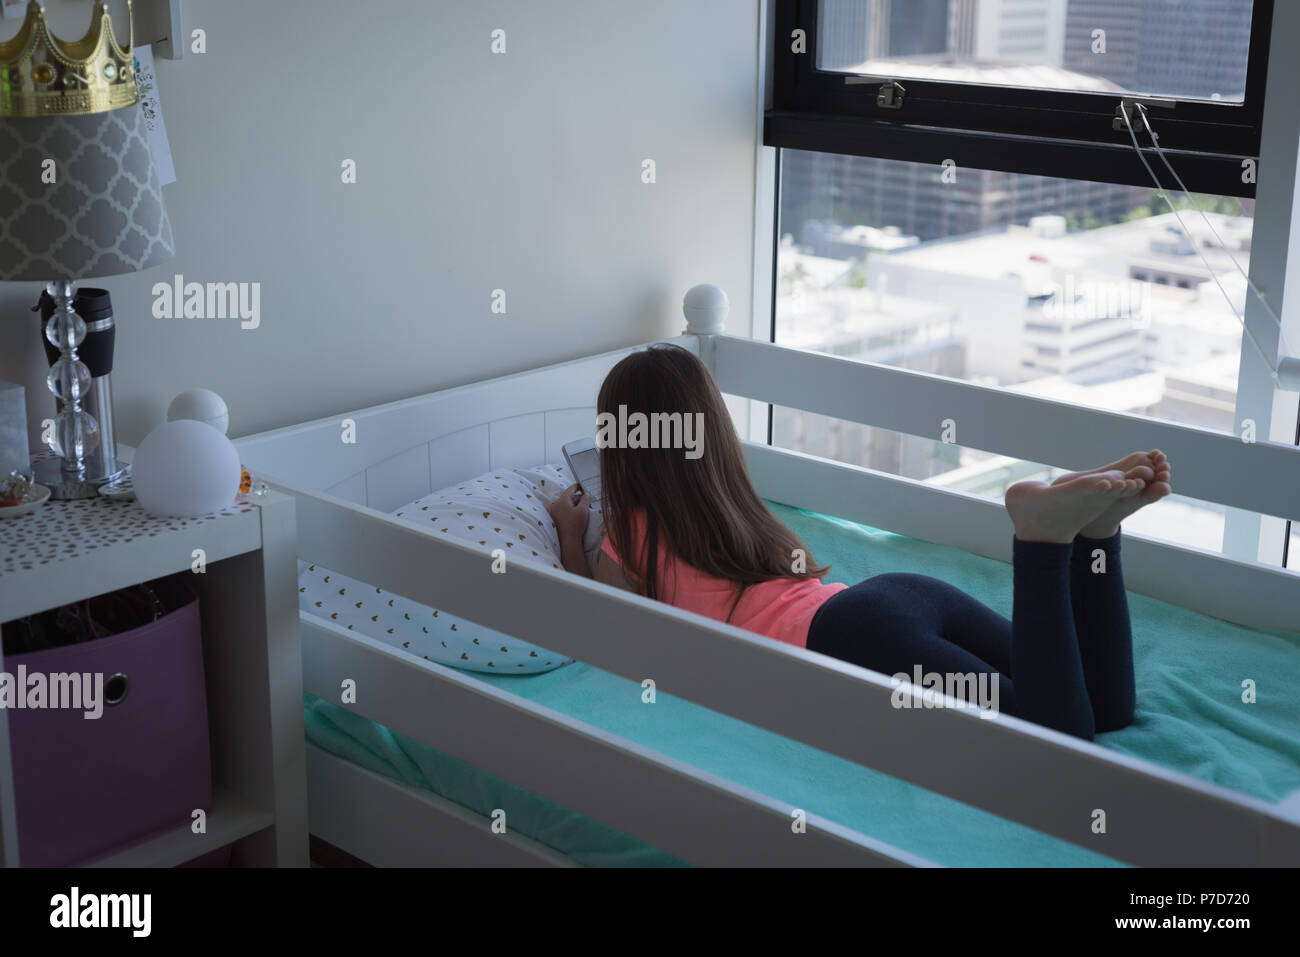 Girl using mobile phone in bedroom Banque D'Images